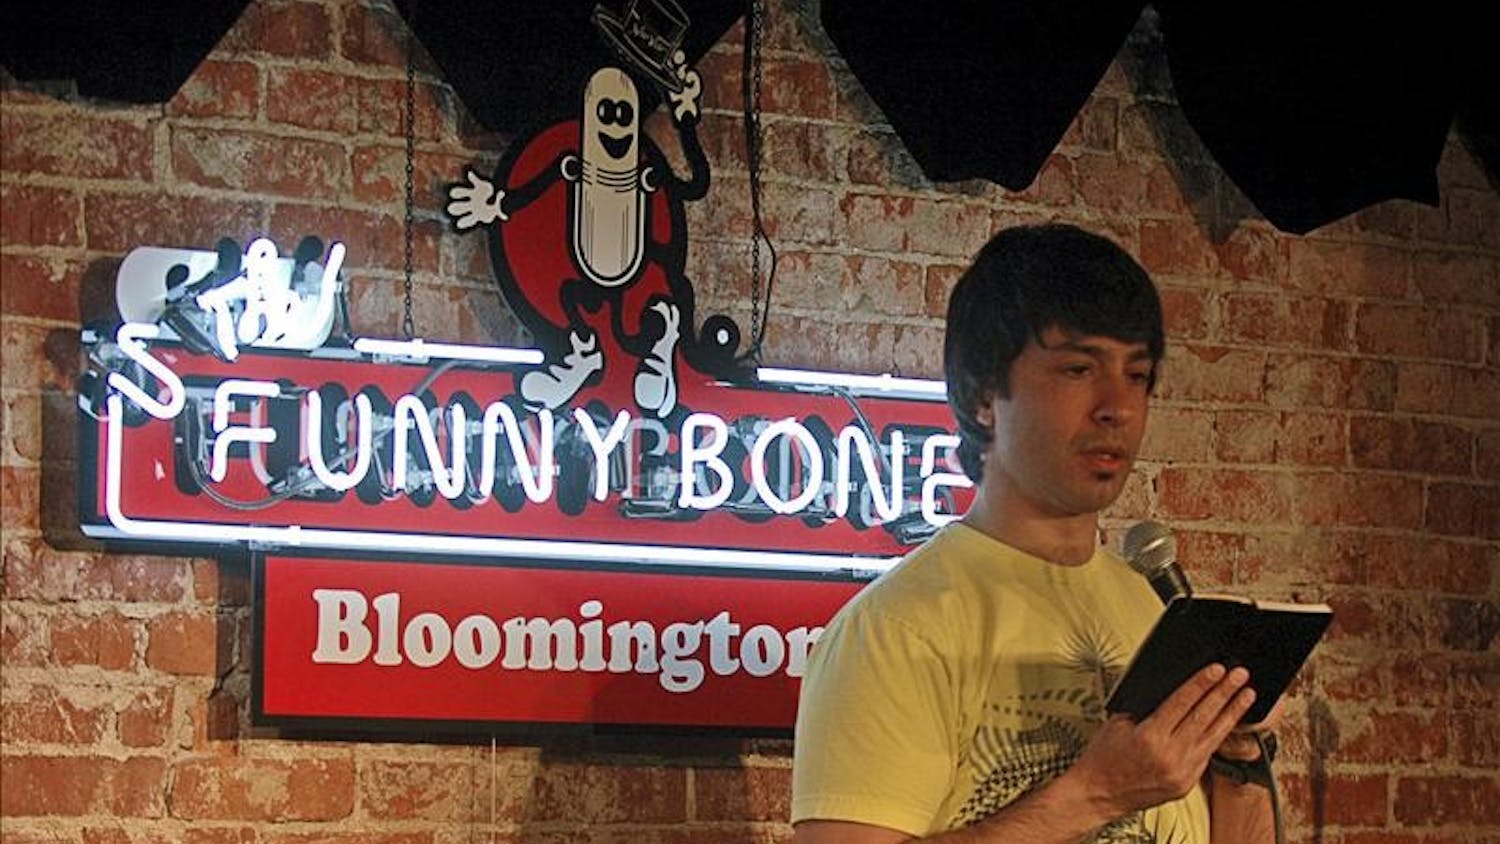 Comedian Arj Barker consults his book of jokes Thursday evening at The Funny Bone. Barker was in town for five performances over the weekend.